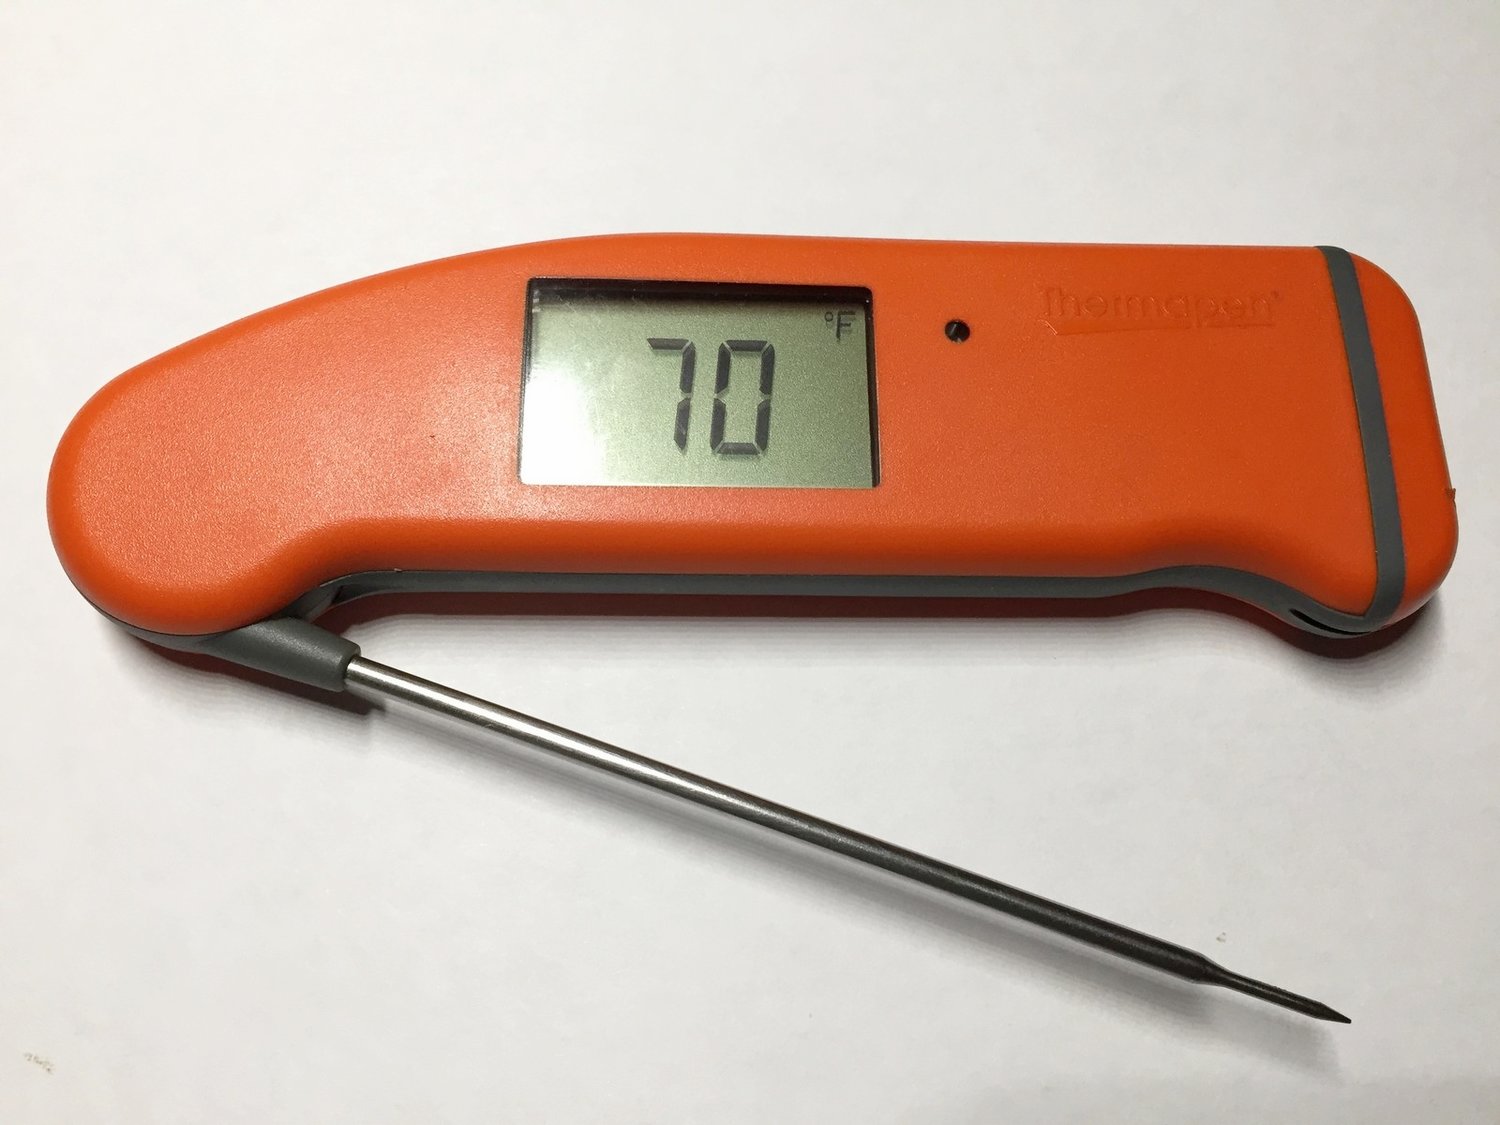 Thermapen MK4 Thermometer: Accurate and Fast Kitchen Thermometer